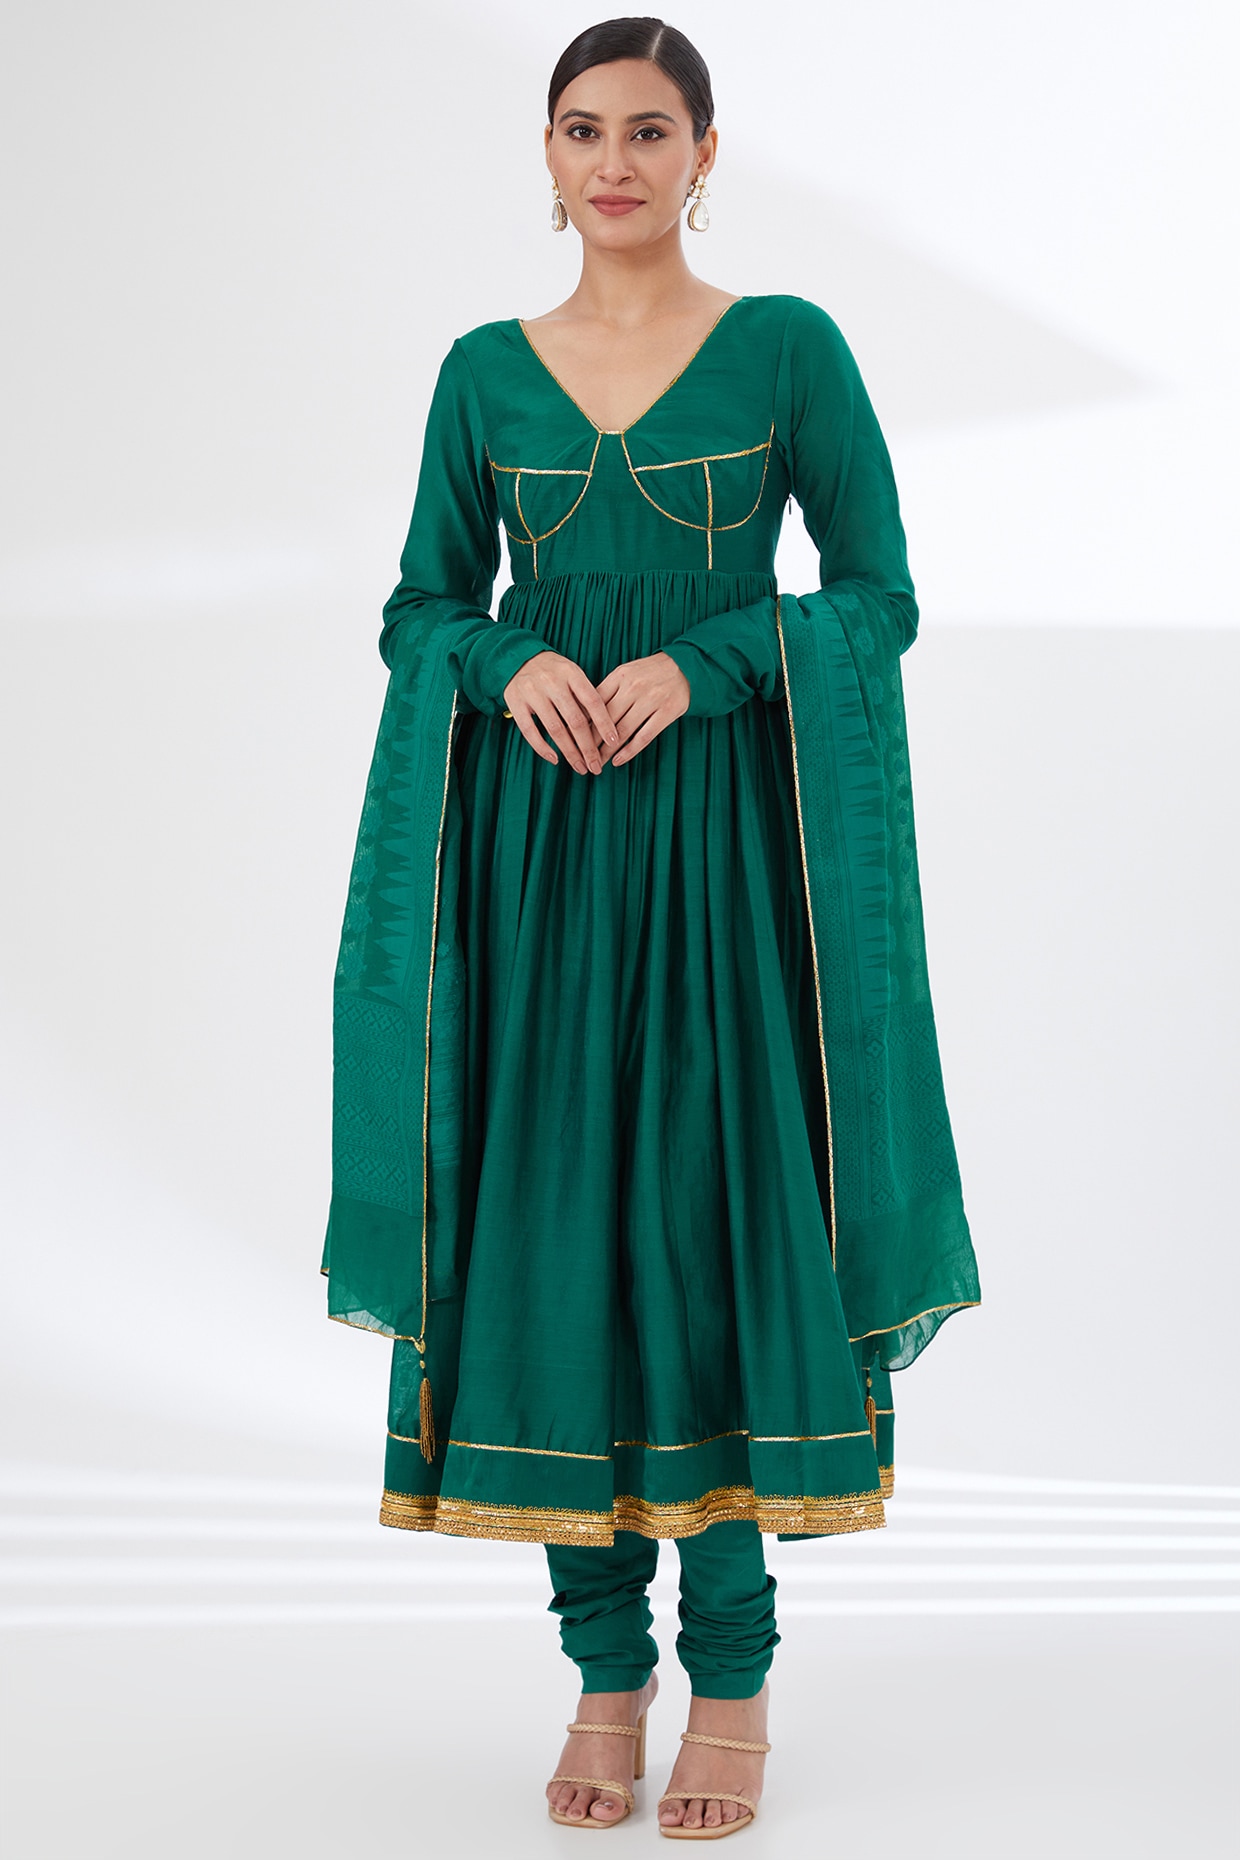 Buy SAINOOR Women'S Straight Style Thread Chudidar Dress Material  (Unstiched) (Gn410731001) at Amazon.in